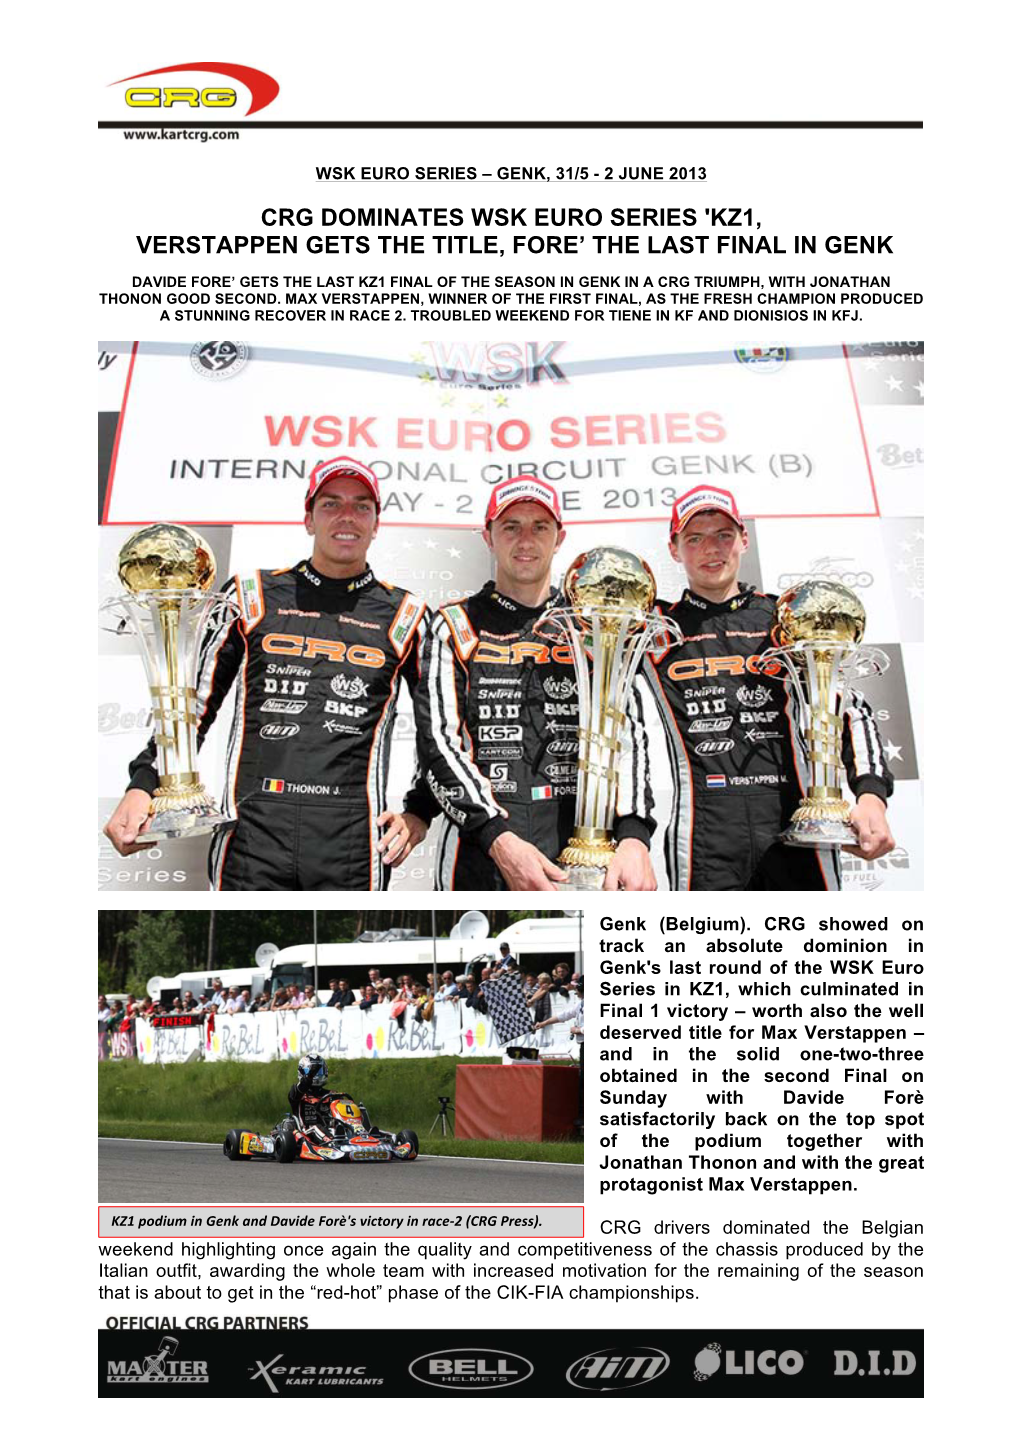 Crg Dominates Wsk Euro Series 'Kz1, Verstappen Gets the Title, Fore’ the Last Final in Genk